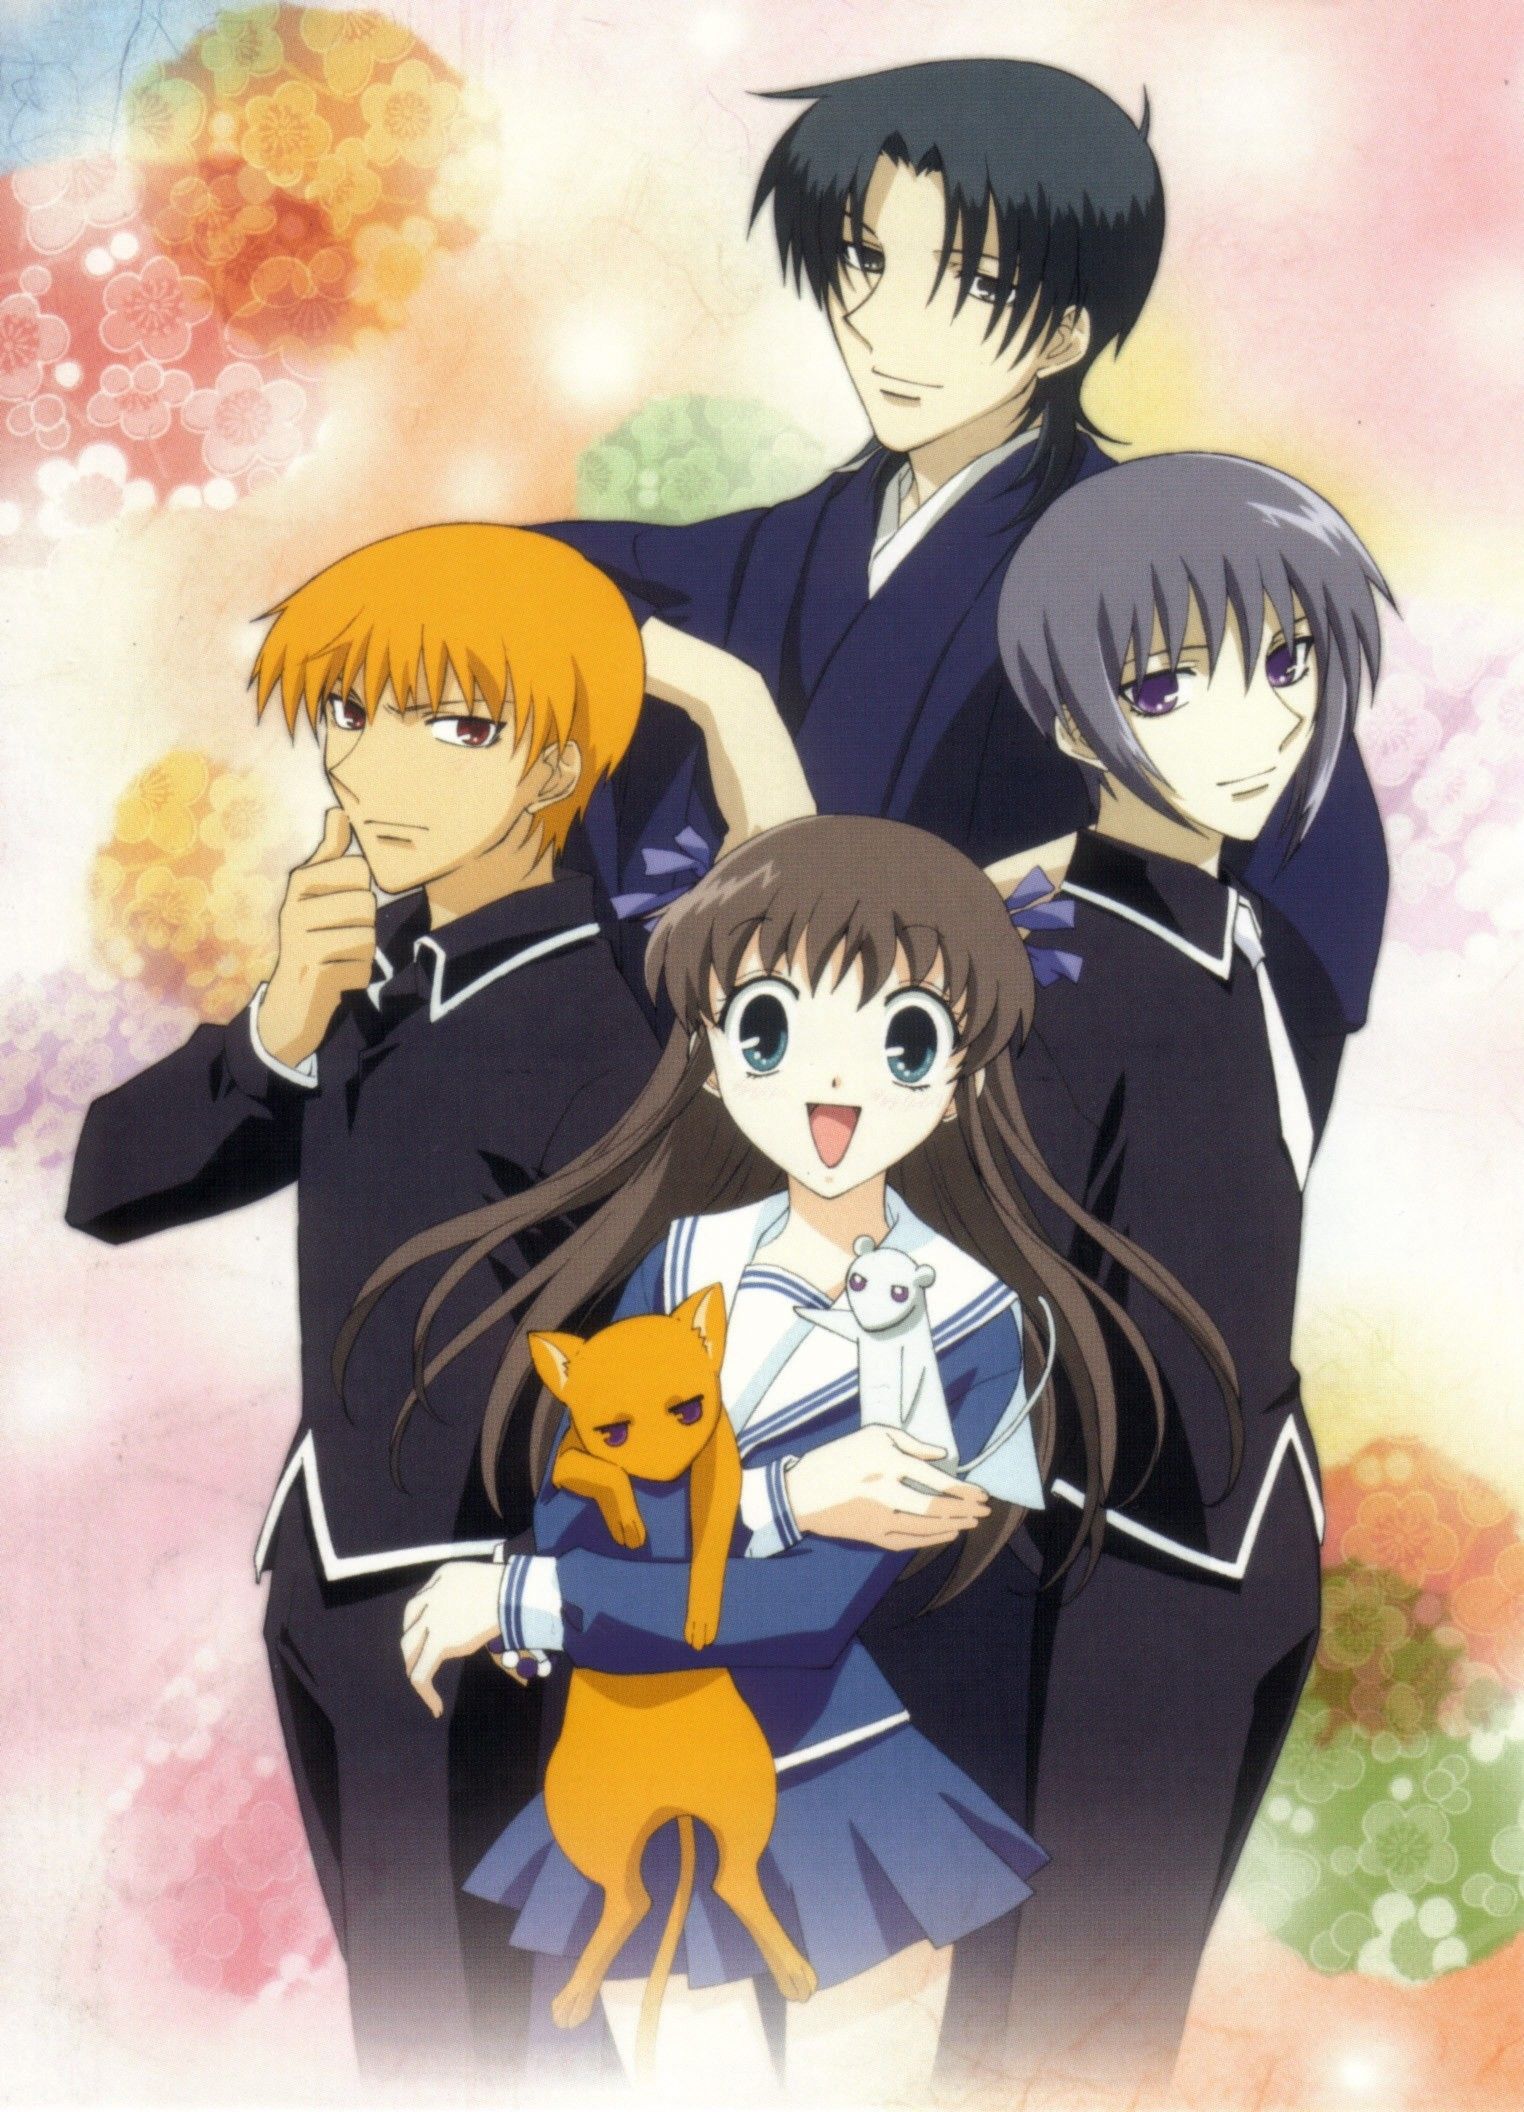 Download Top Anime Fruits Basket Characters Wallpaper